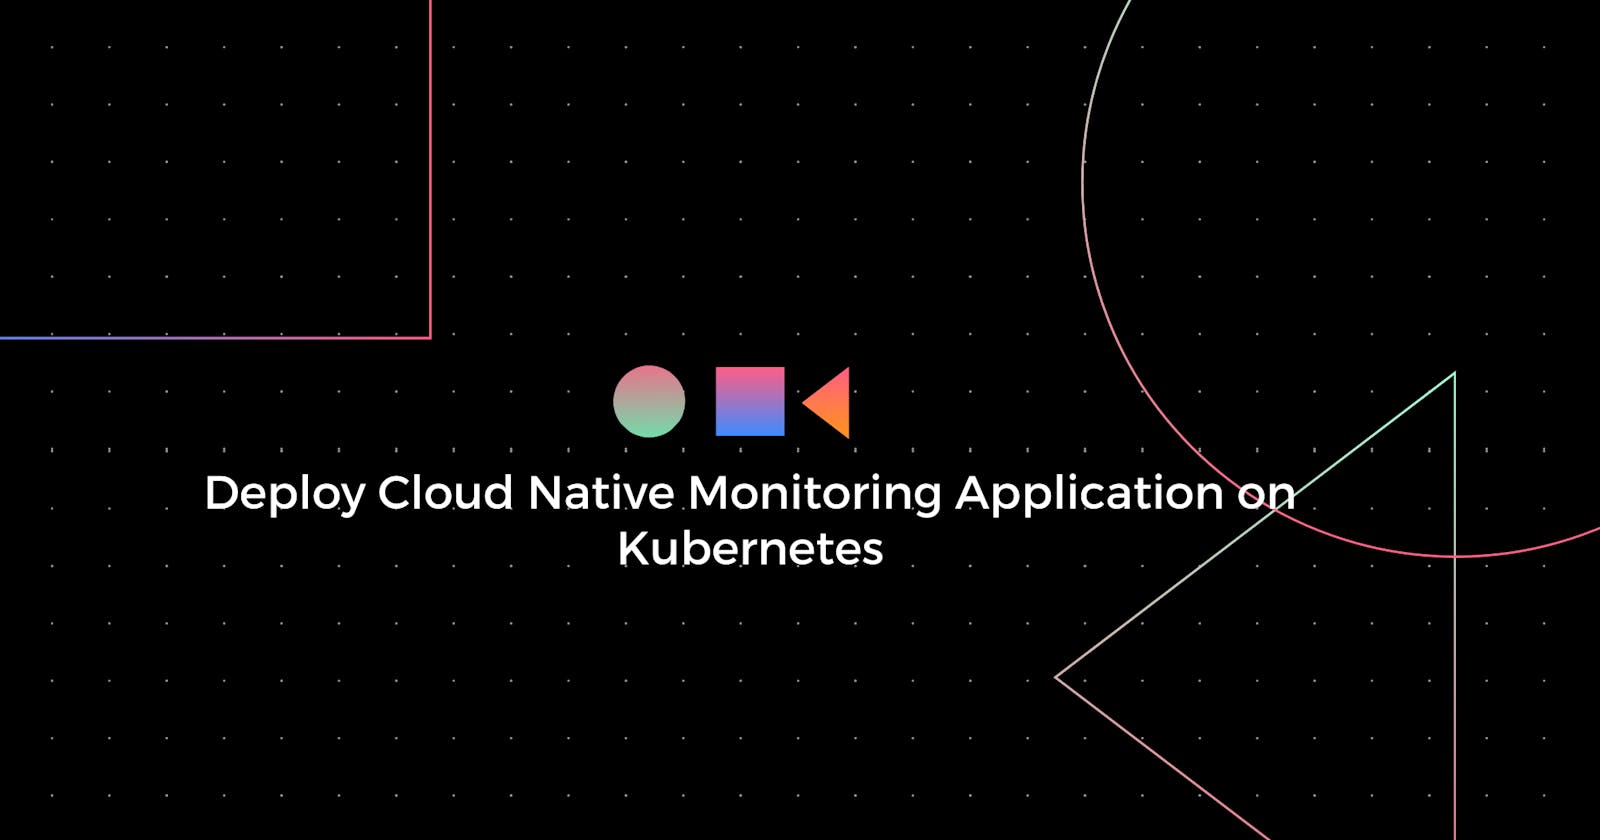 Deploy a Cloud Native Monitoring Application on Kubernetes